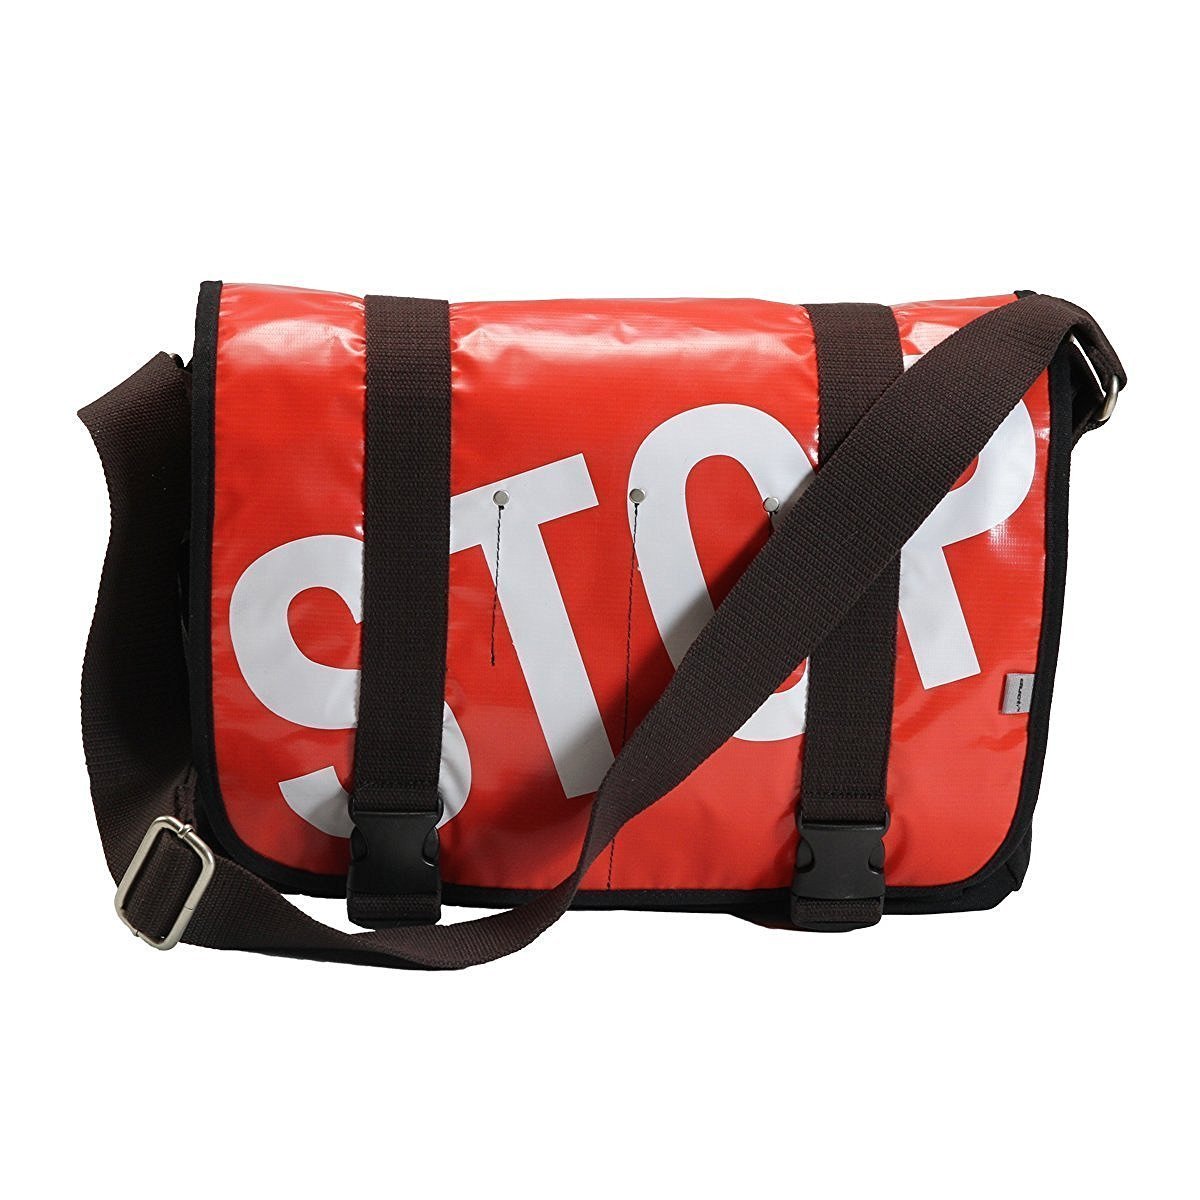 Ducti Laptop Messenger Bags, Red STOP